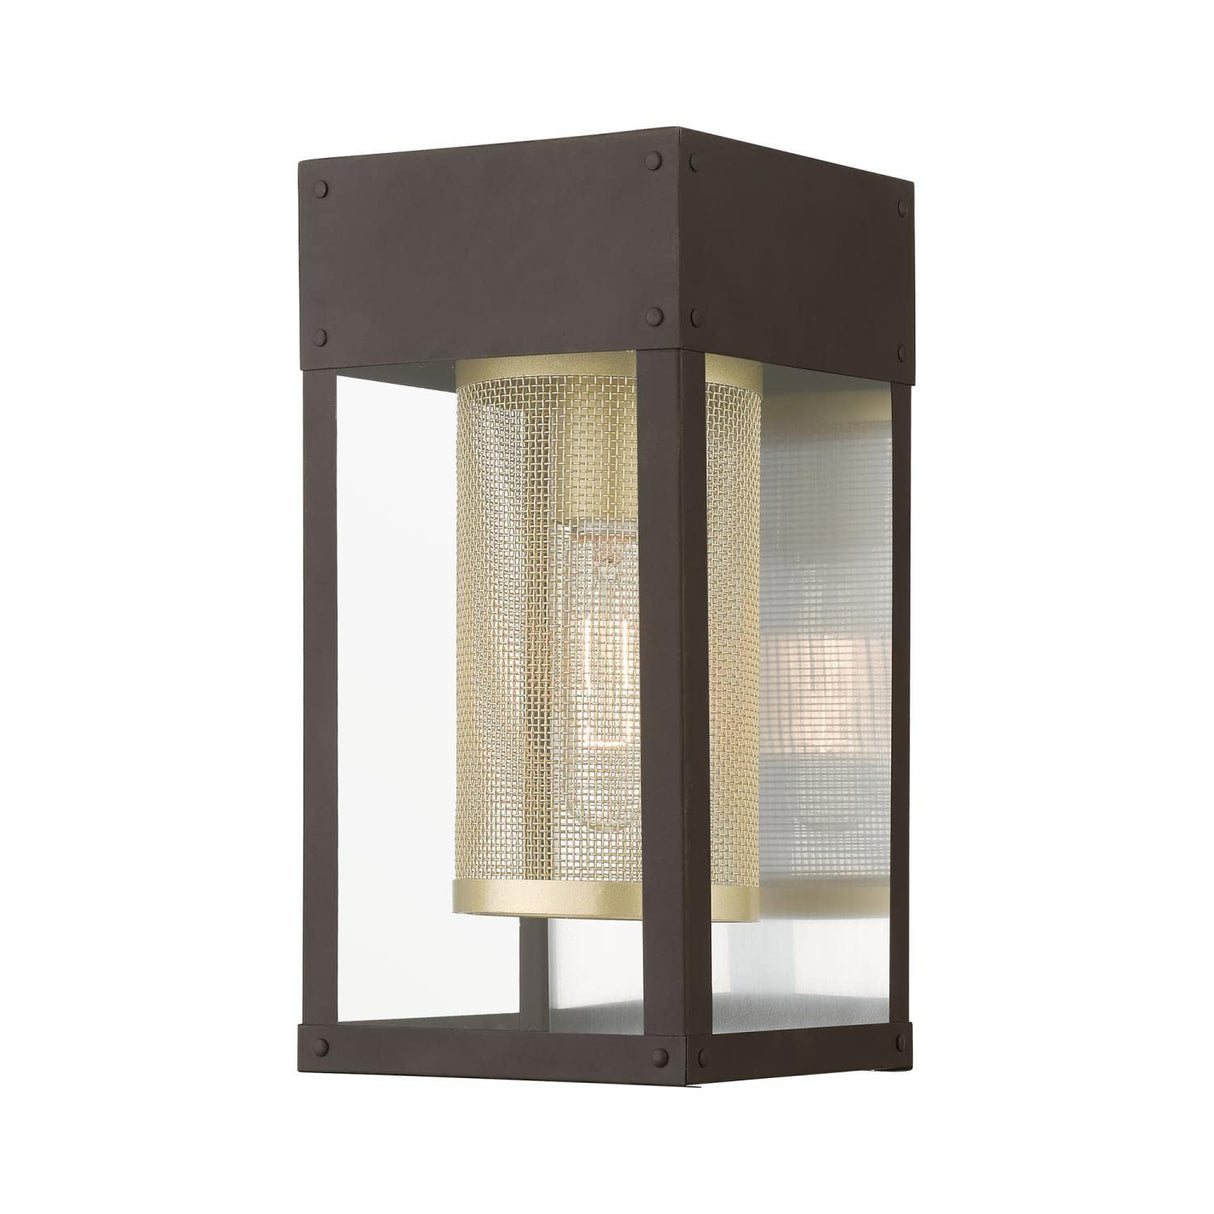 Livex Lighting 20761-07 Franklin - 1 Light Outdoor Wall Lantern in Nautical Style-12 Inches Tall and 6 Inches Wide, Finish Color: Bronze/Soft Gold/Brushed Nickel Stainless Steel